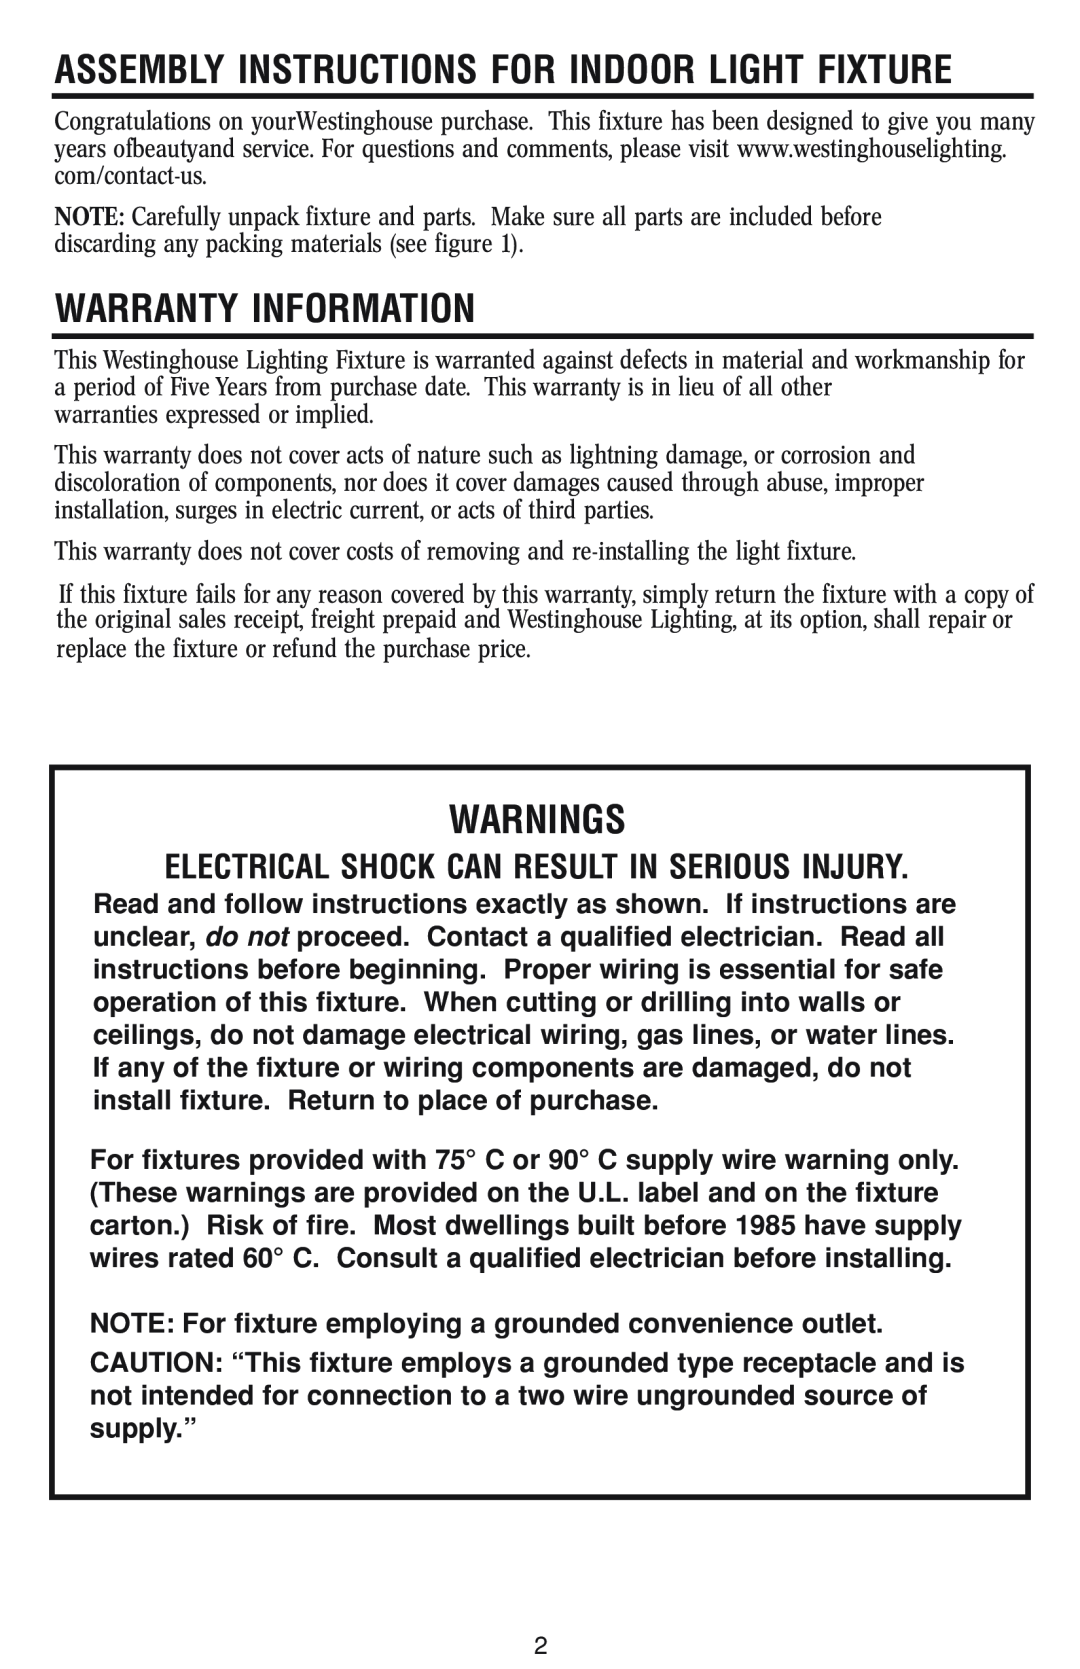 Westinghouse 82011 owner manual Warranty Information, Warnings, Assembly Instructions For Indoor Light Fixture 